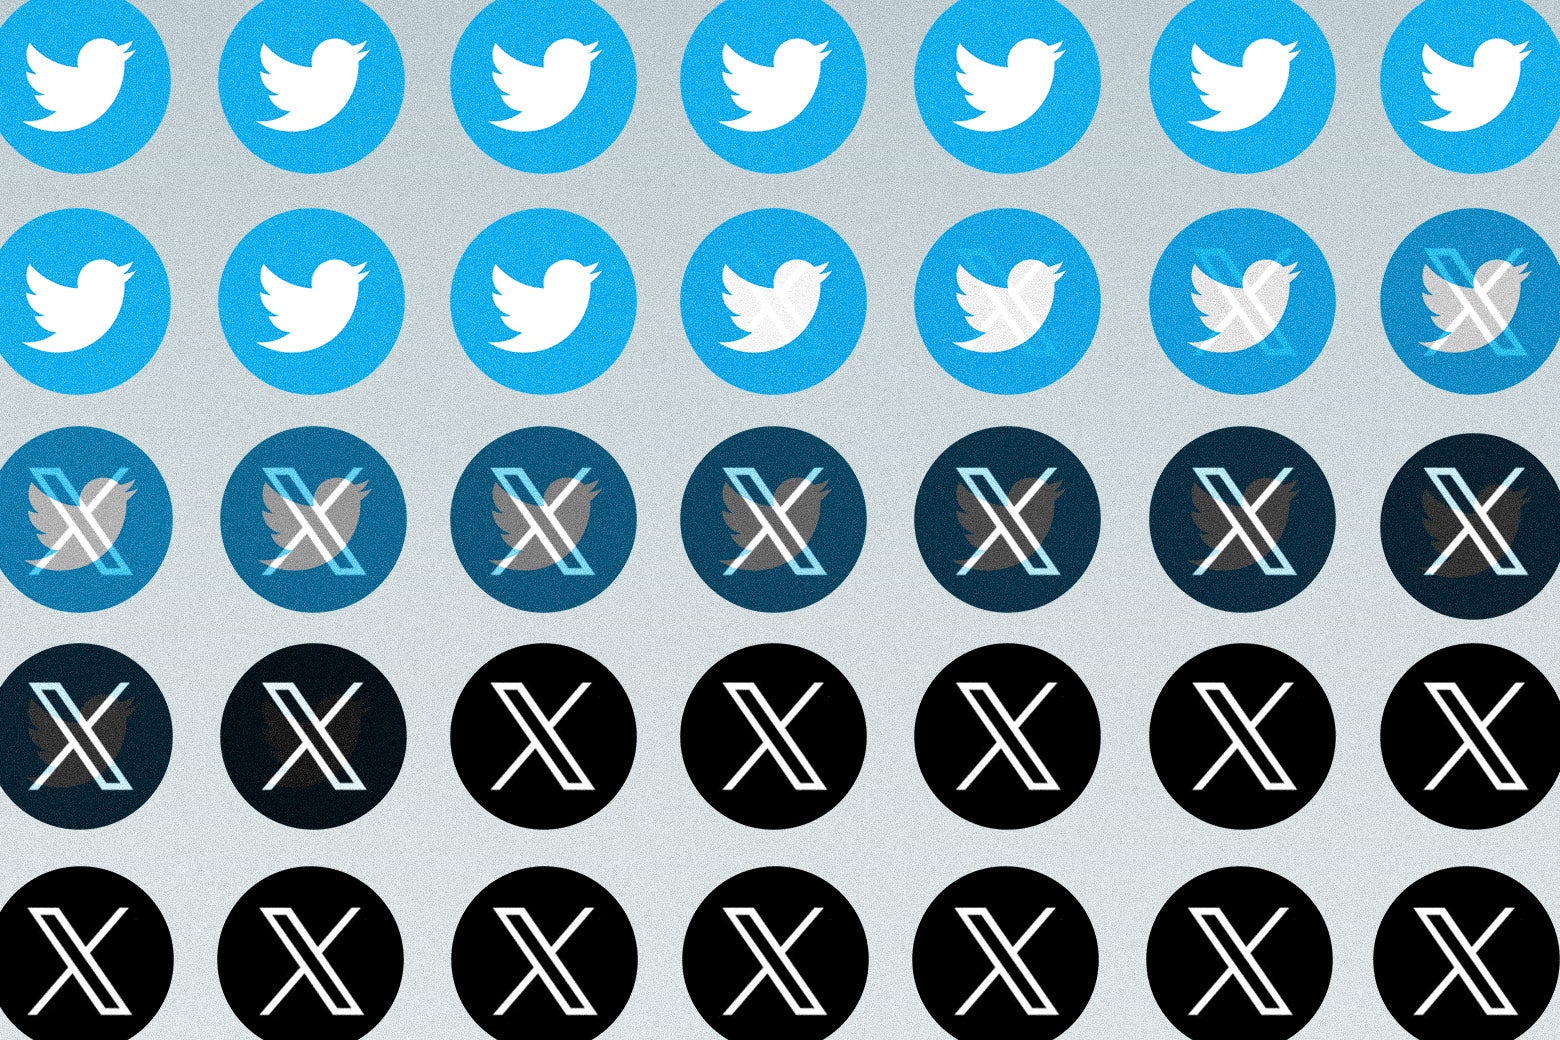 How You’ll Know You Can Finally Call Twitter ‘X’